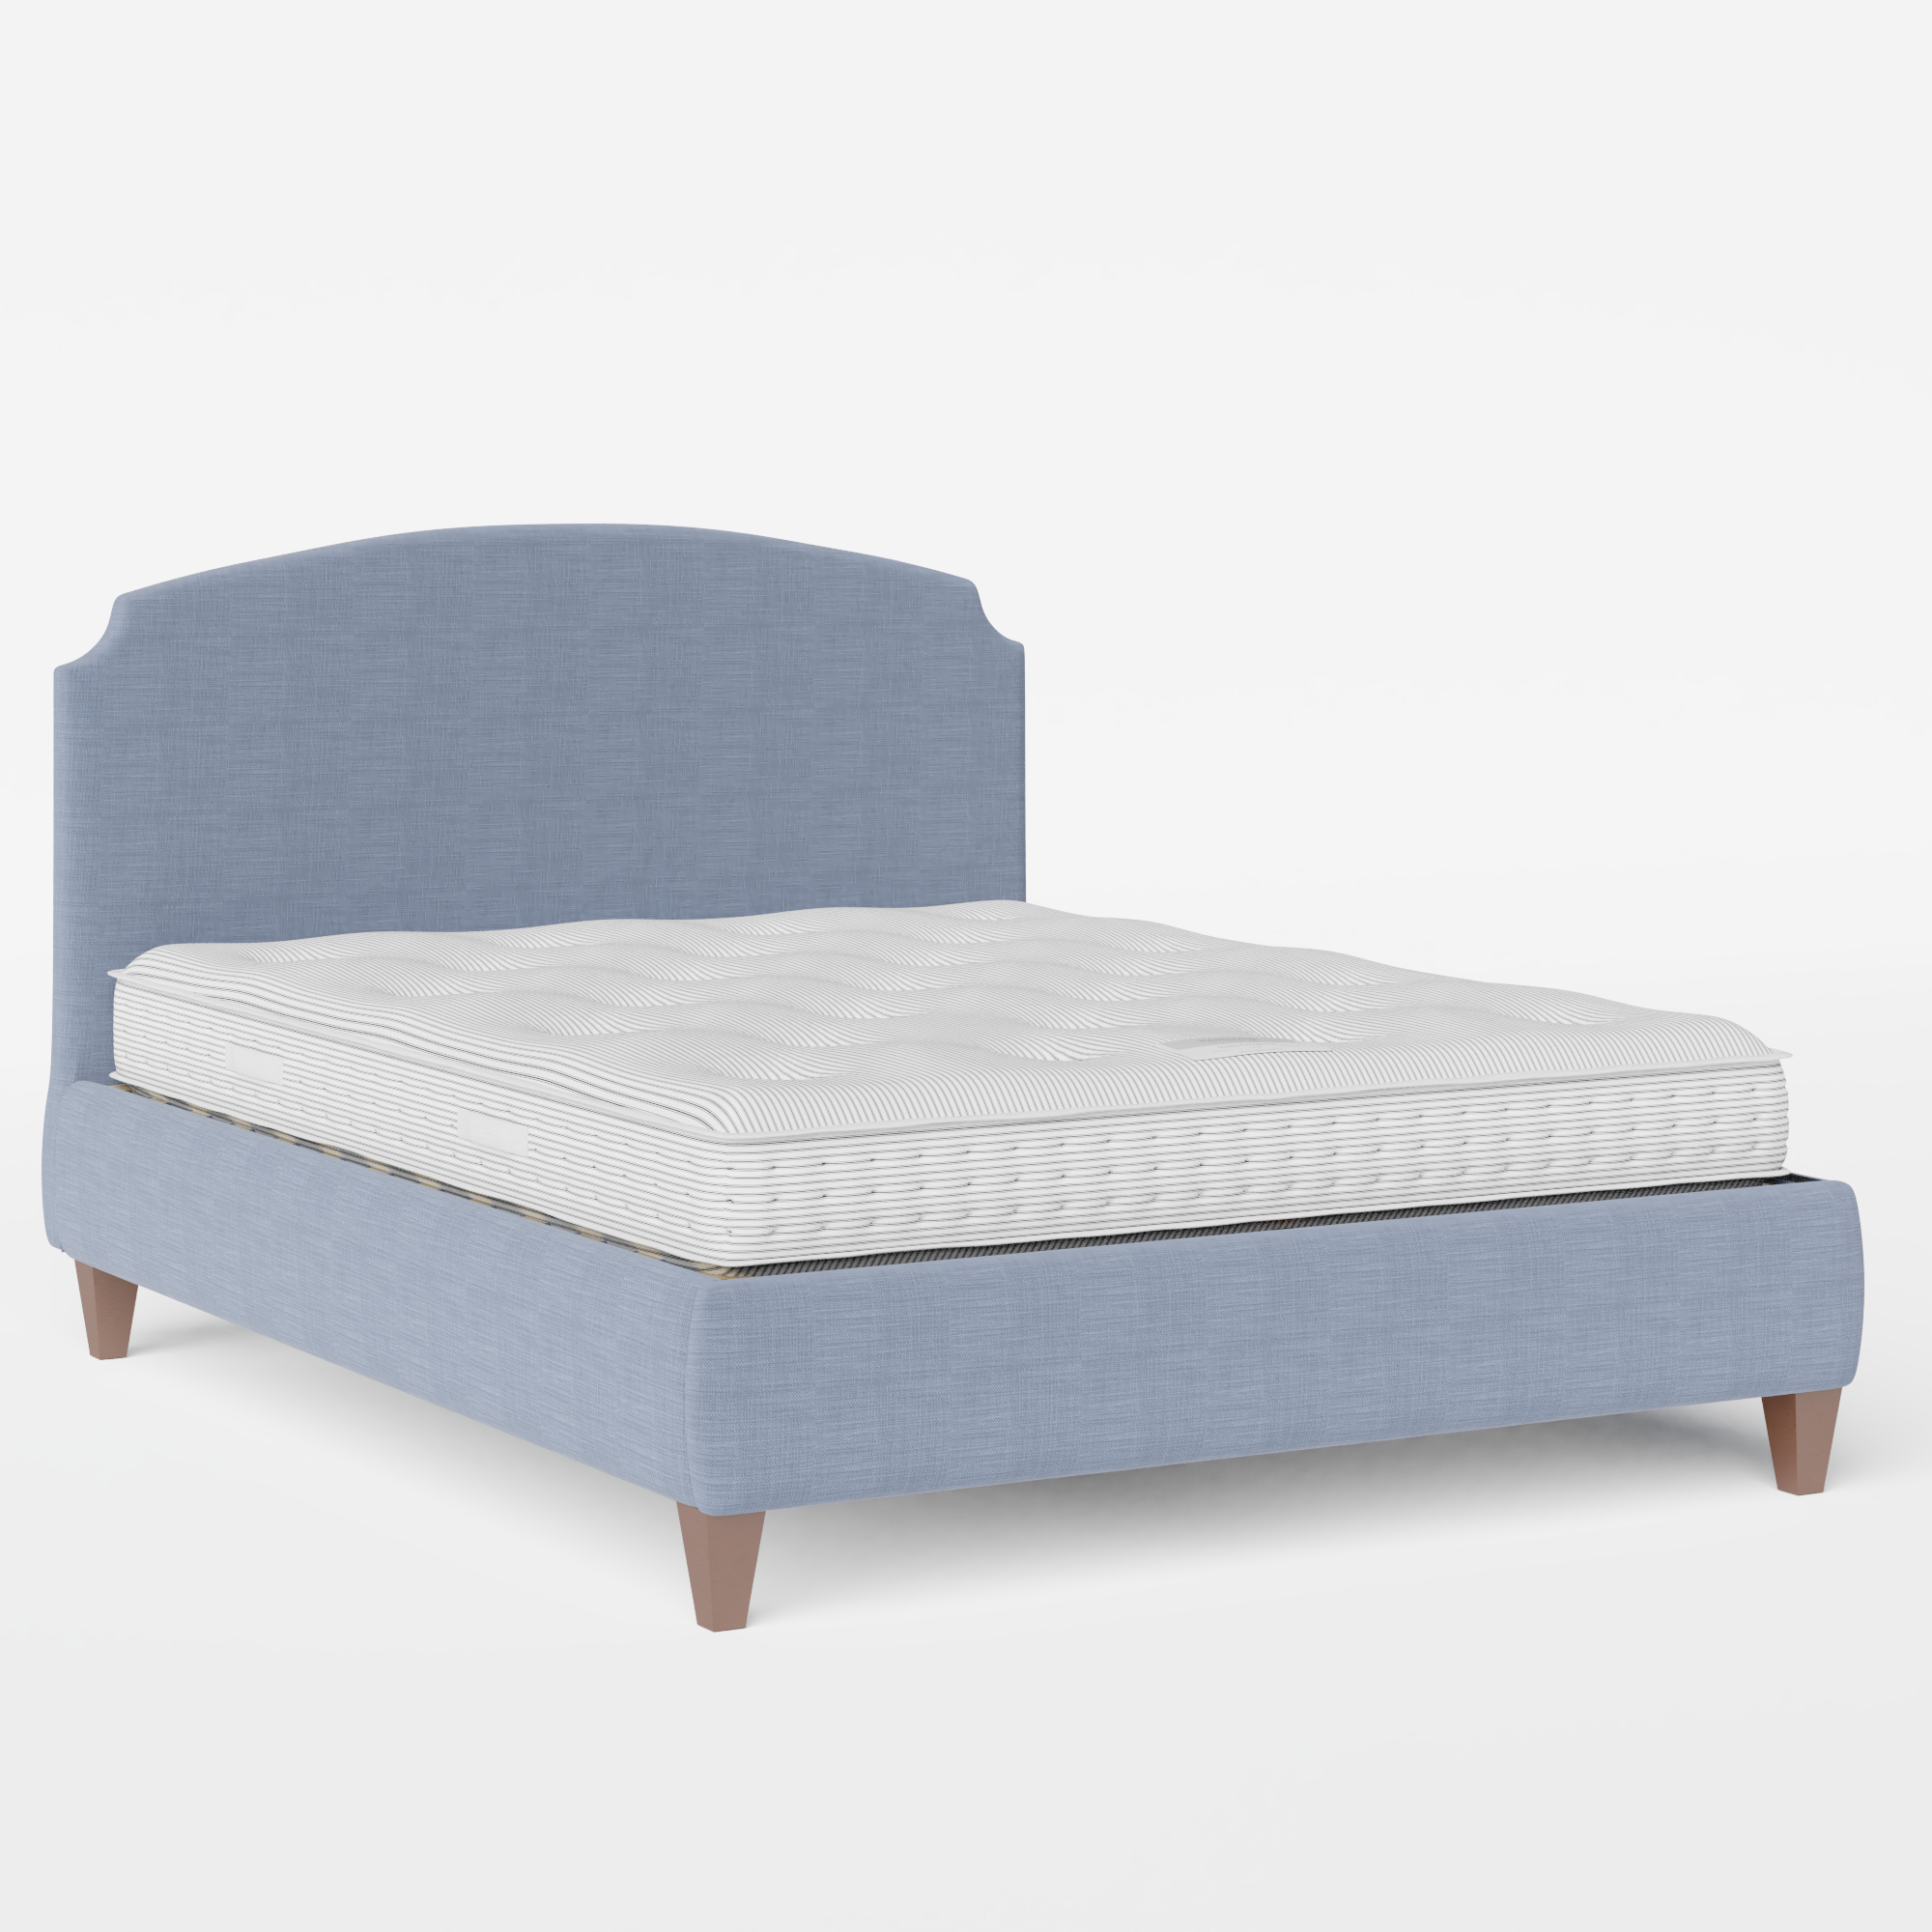 Lide upholstered bed in blue fabric